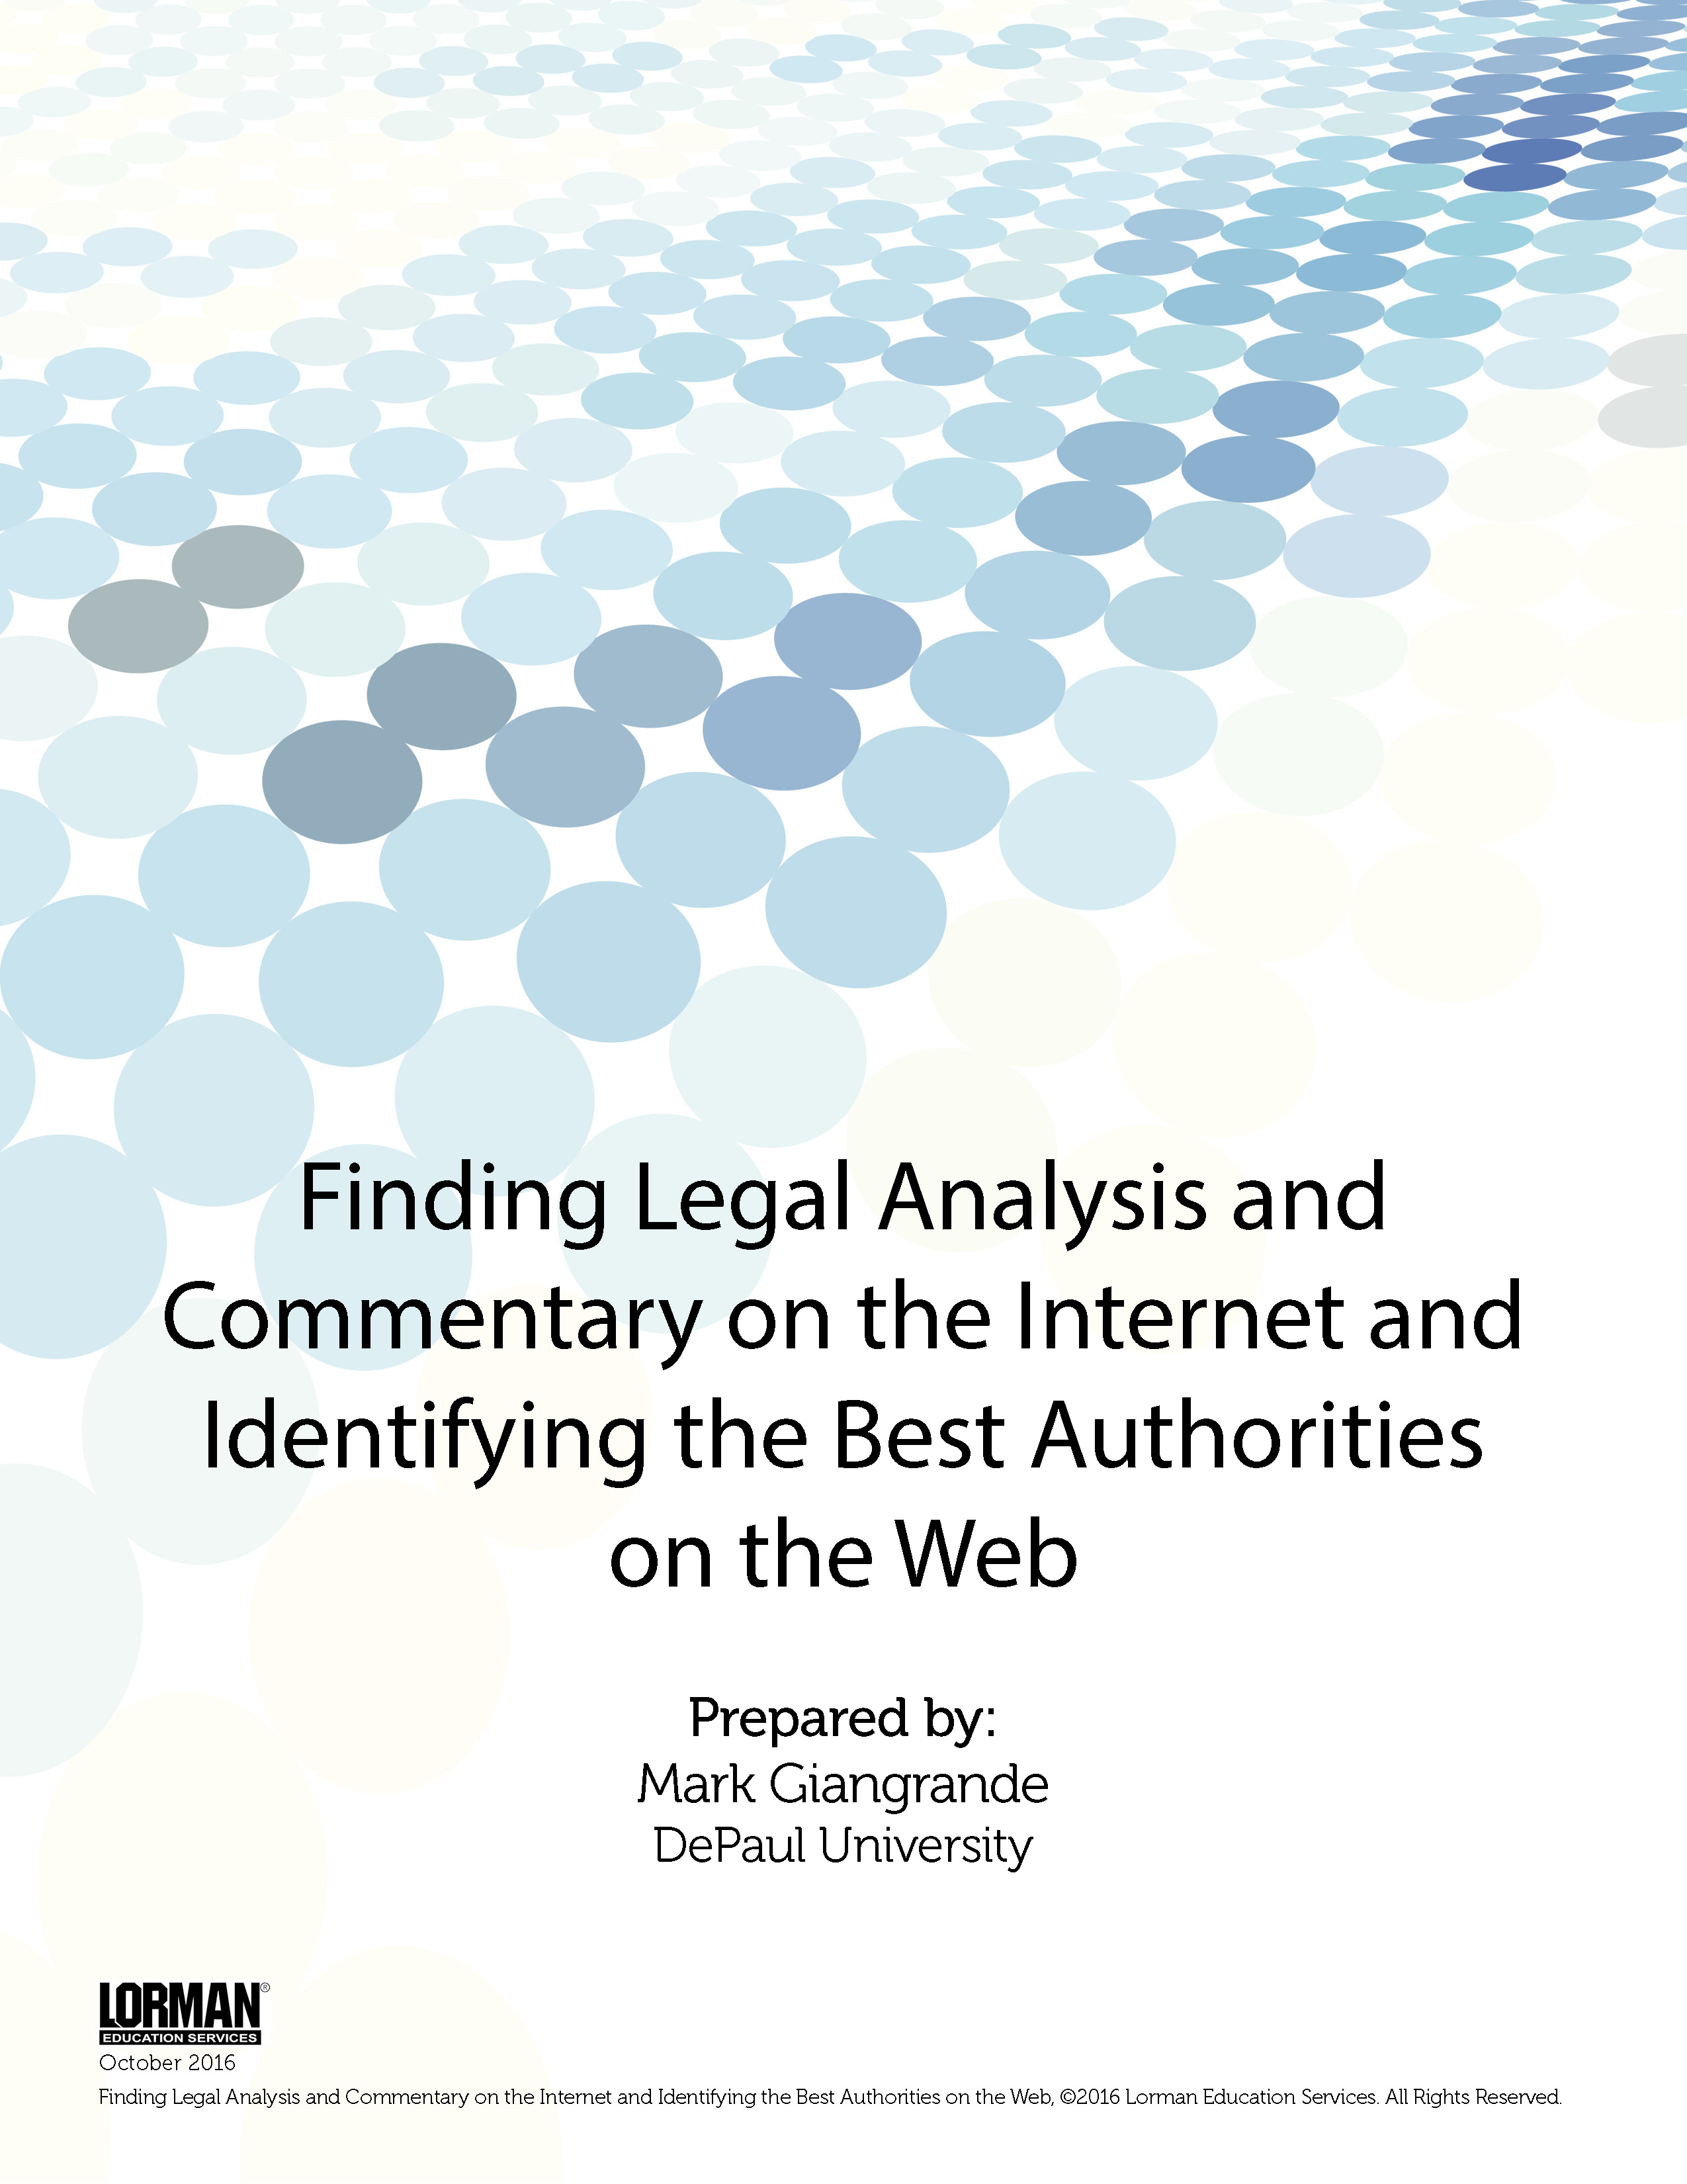 Finding Legal Analysis and Commentary on the Internet and Identifying the Web’s Best Authorities